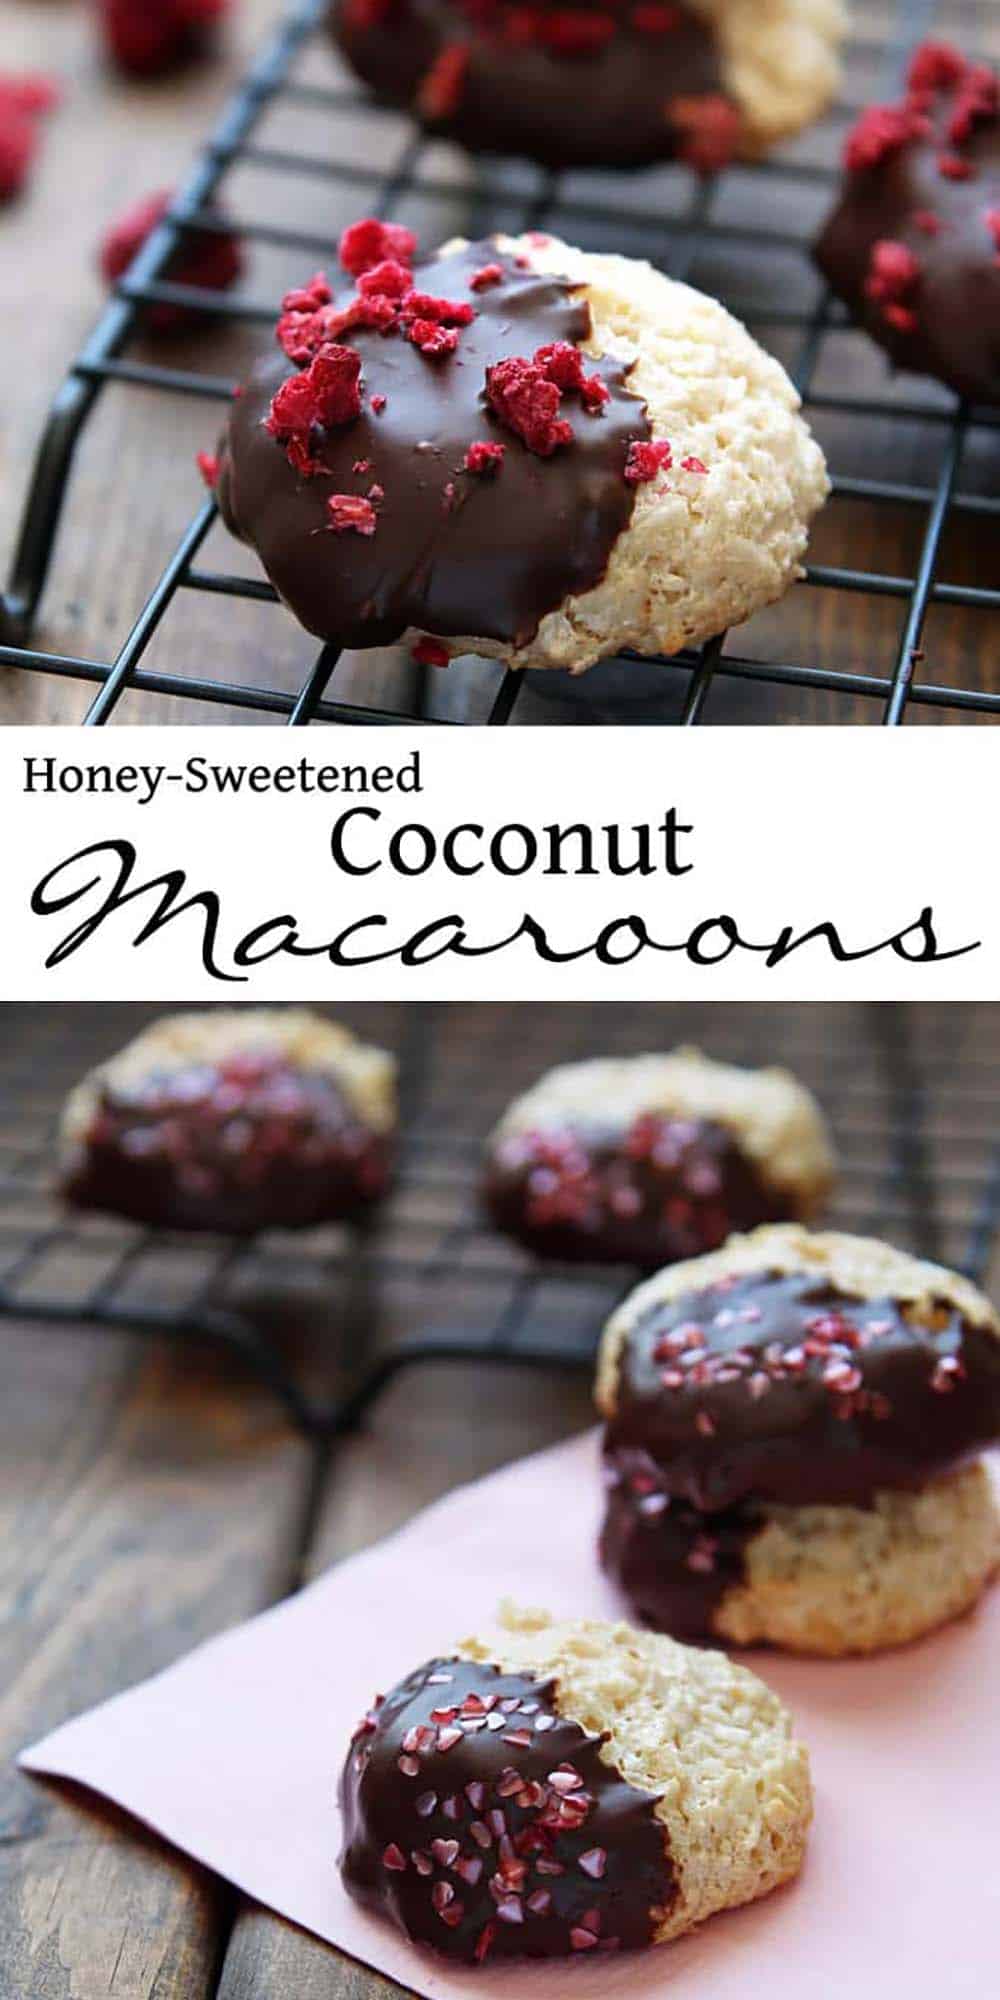 Coconut Macaroon Clouds